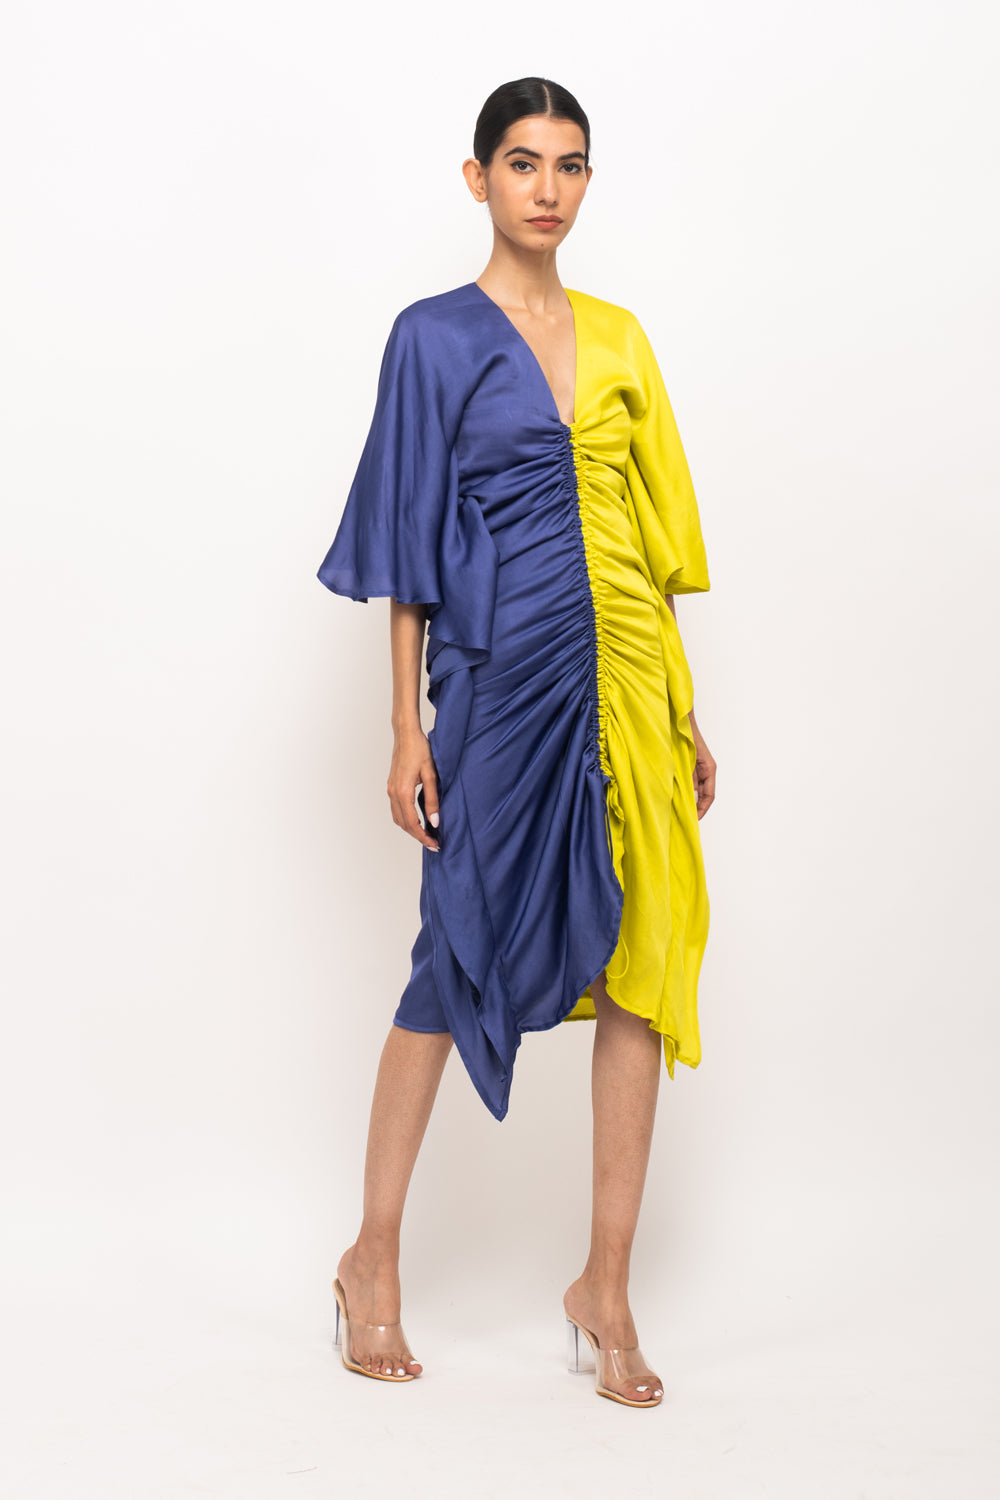 Blue-Neon Rouched Dress